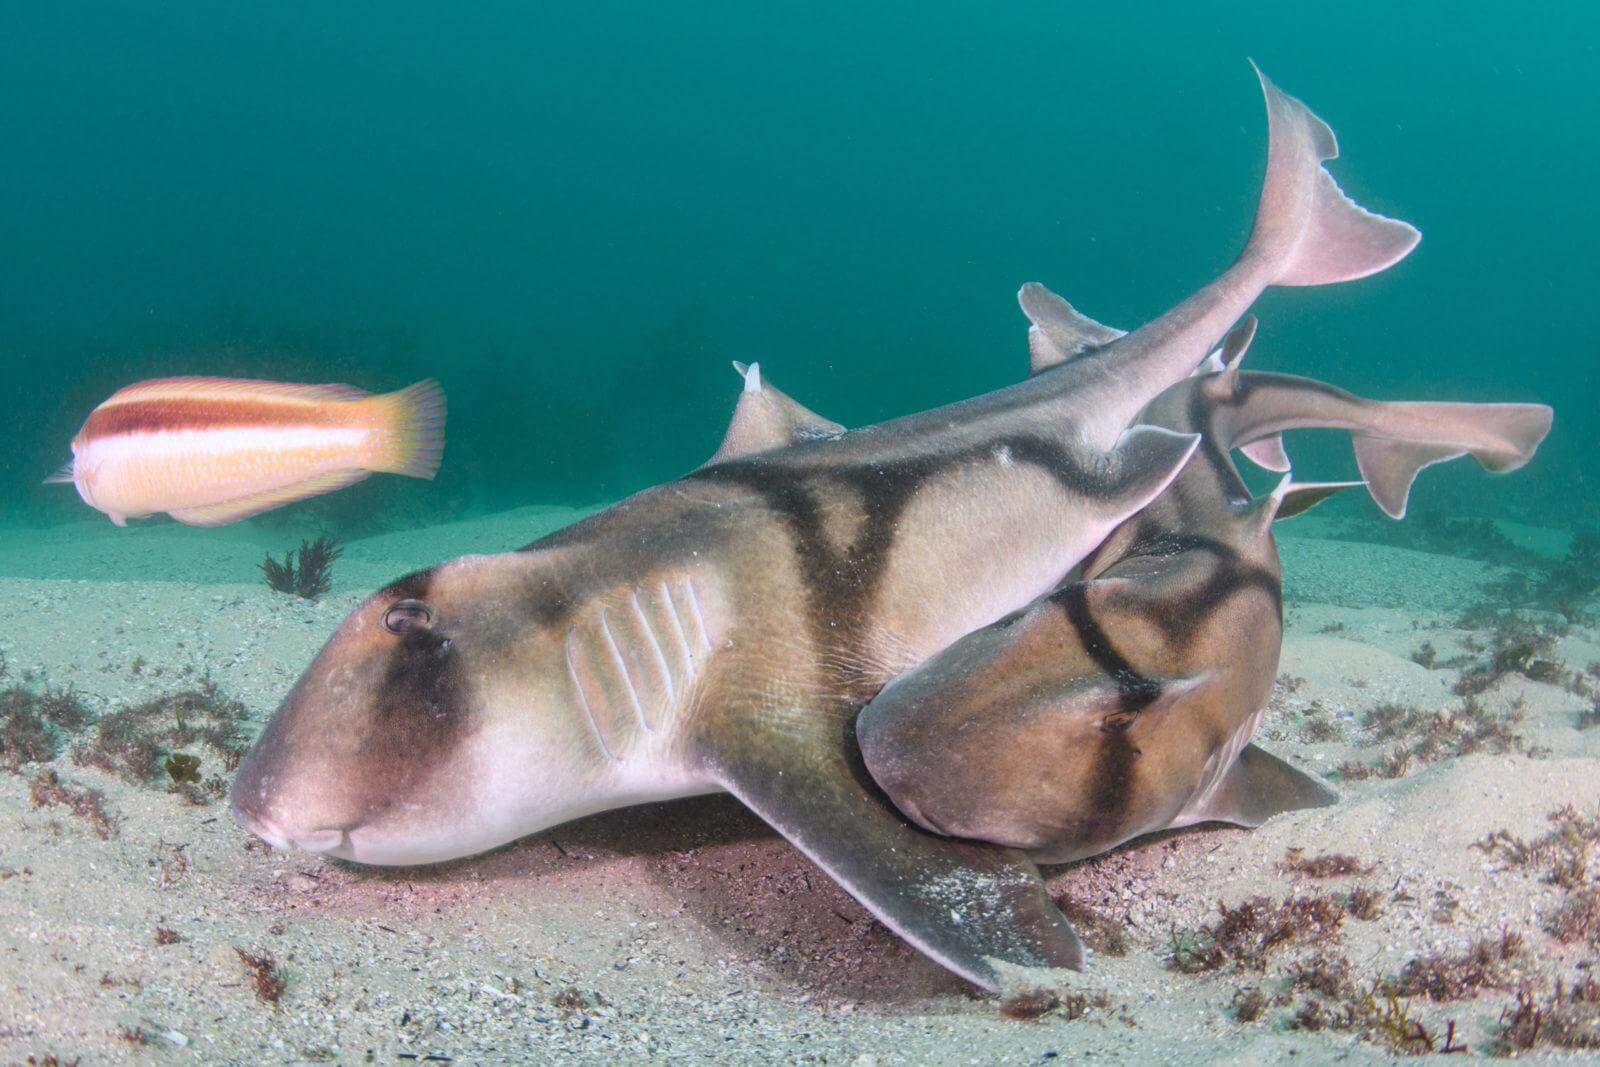 Rare Images of Port Jackson Sharks Mating